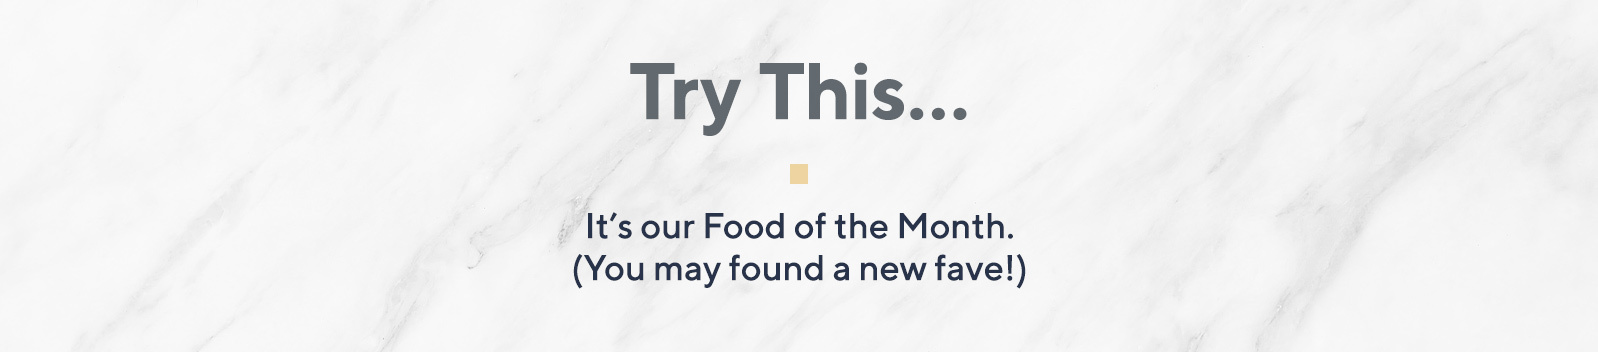 Try This…  It's our Food of the Month. (You may found a new fave!)